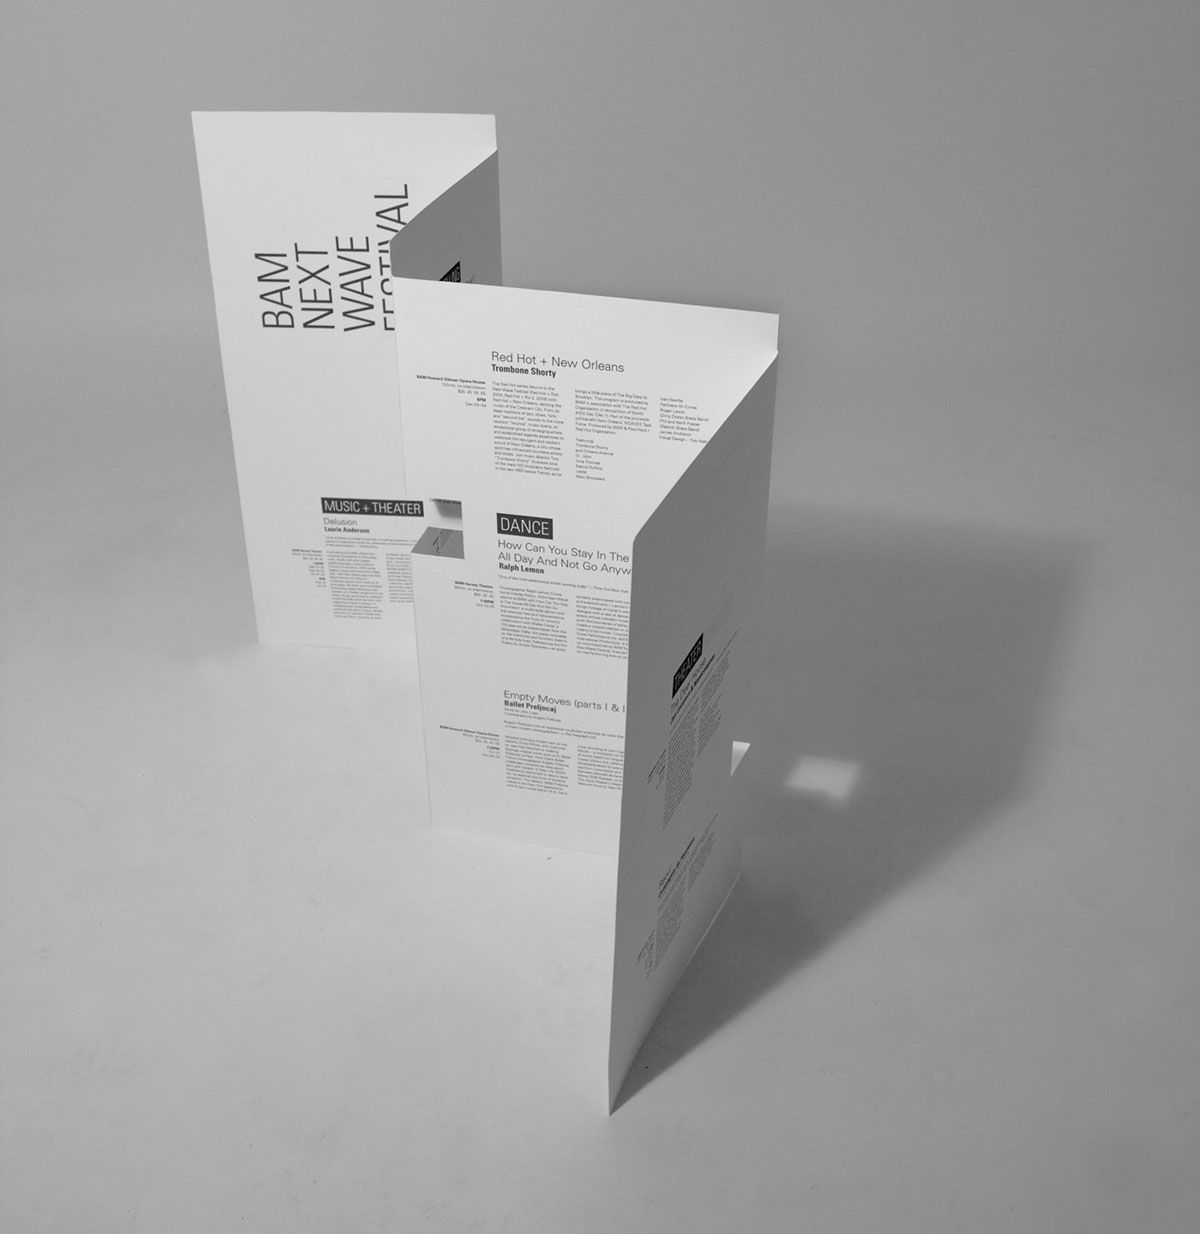 Popup brochure BAM Next wave festival light and shadow Paper-engineering sculptural